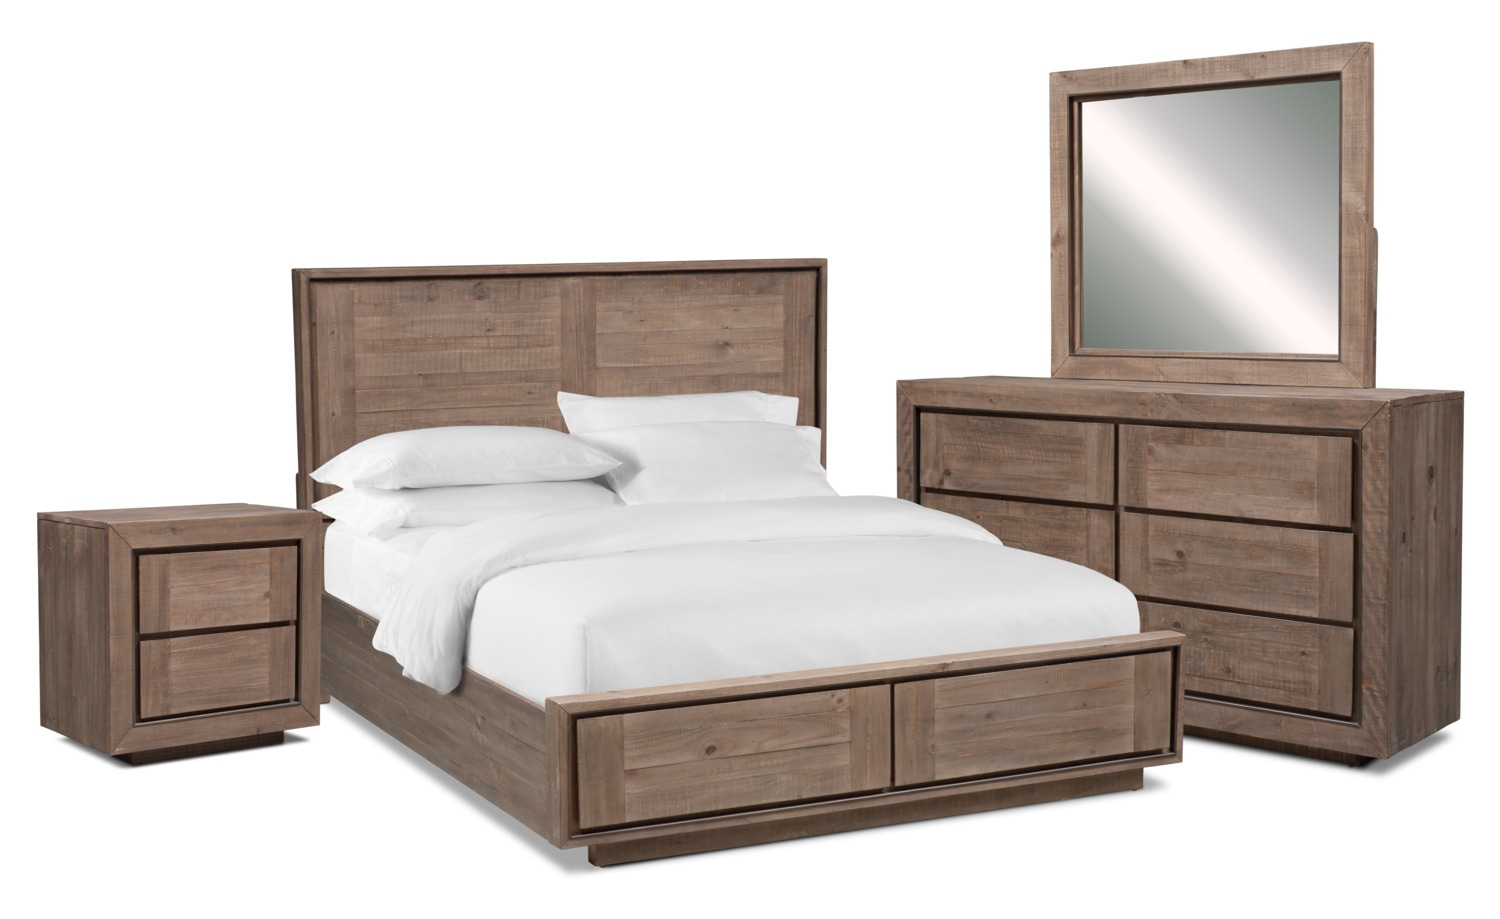 Henry 6 Piece Storage Bedroom Set With Nightstand Dresser And Mirror pertaining to sizing 1500 X 919